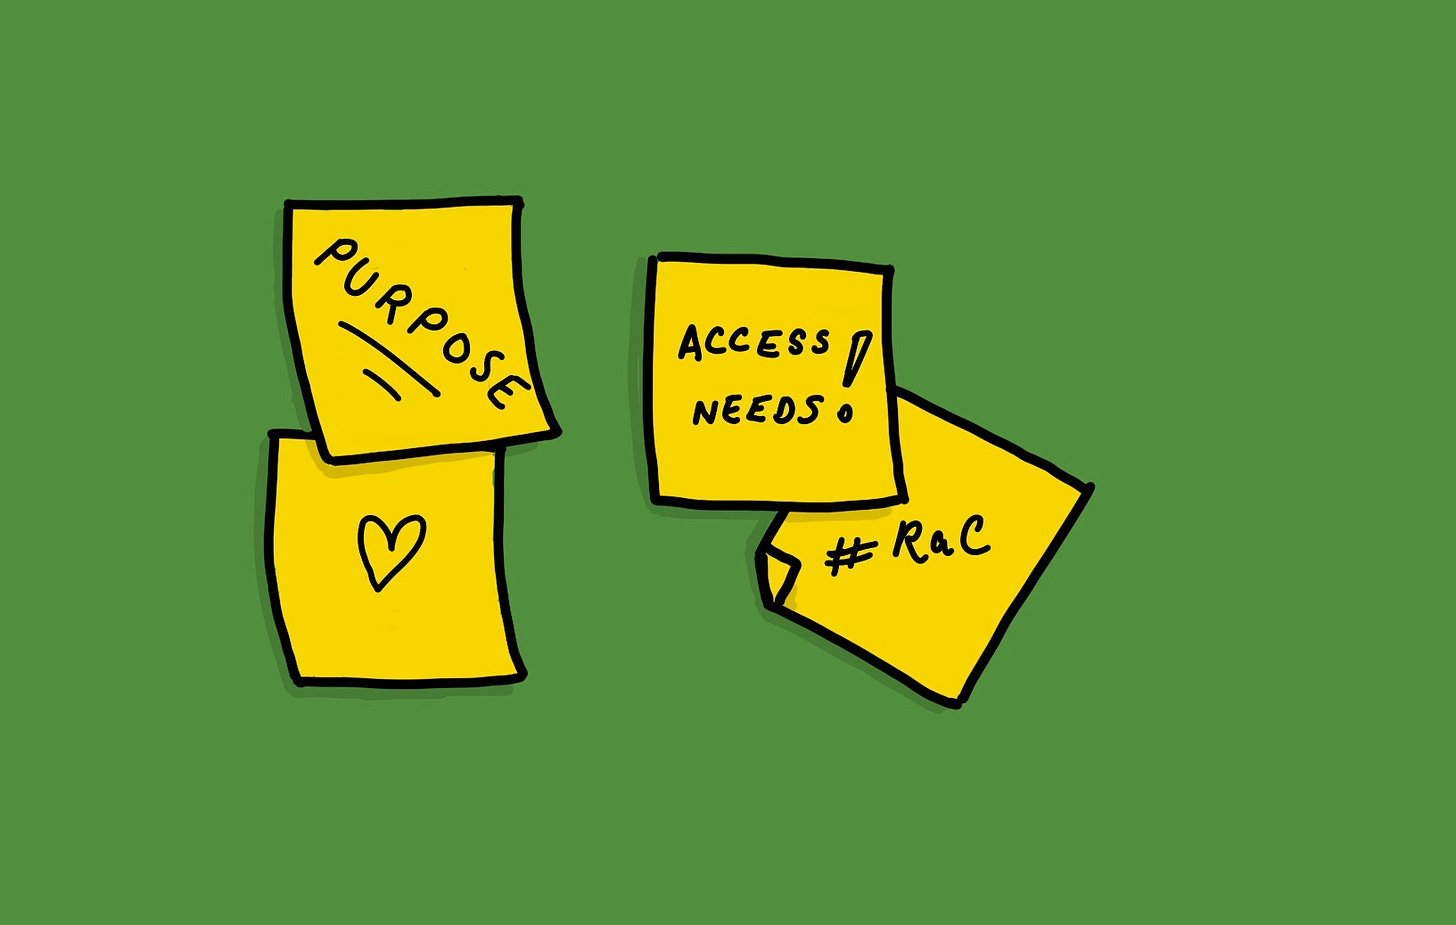 Post it notes saying purpose, access needs!, and #RaC